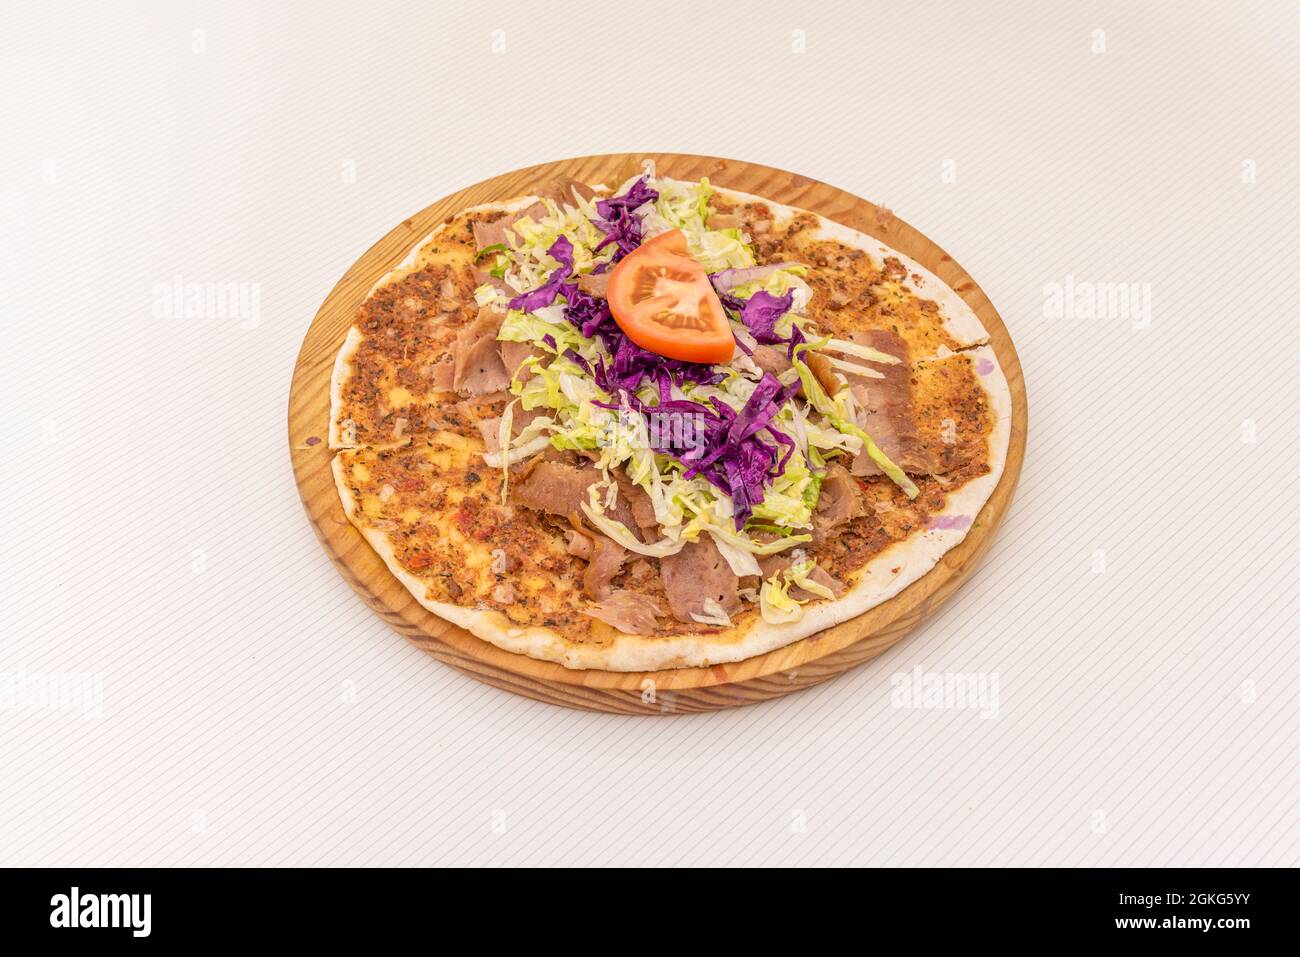 Arab kebab pizza, lahmacun with purple cabbage, tomato, grated iceberg lettuce on wooden plate. Stock Photo